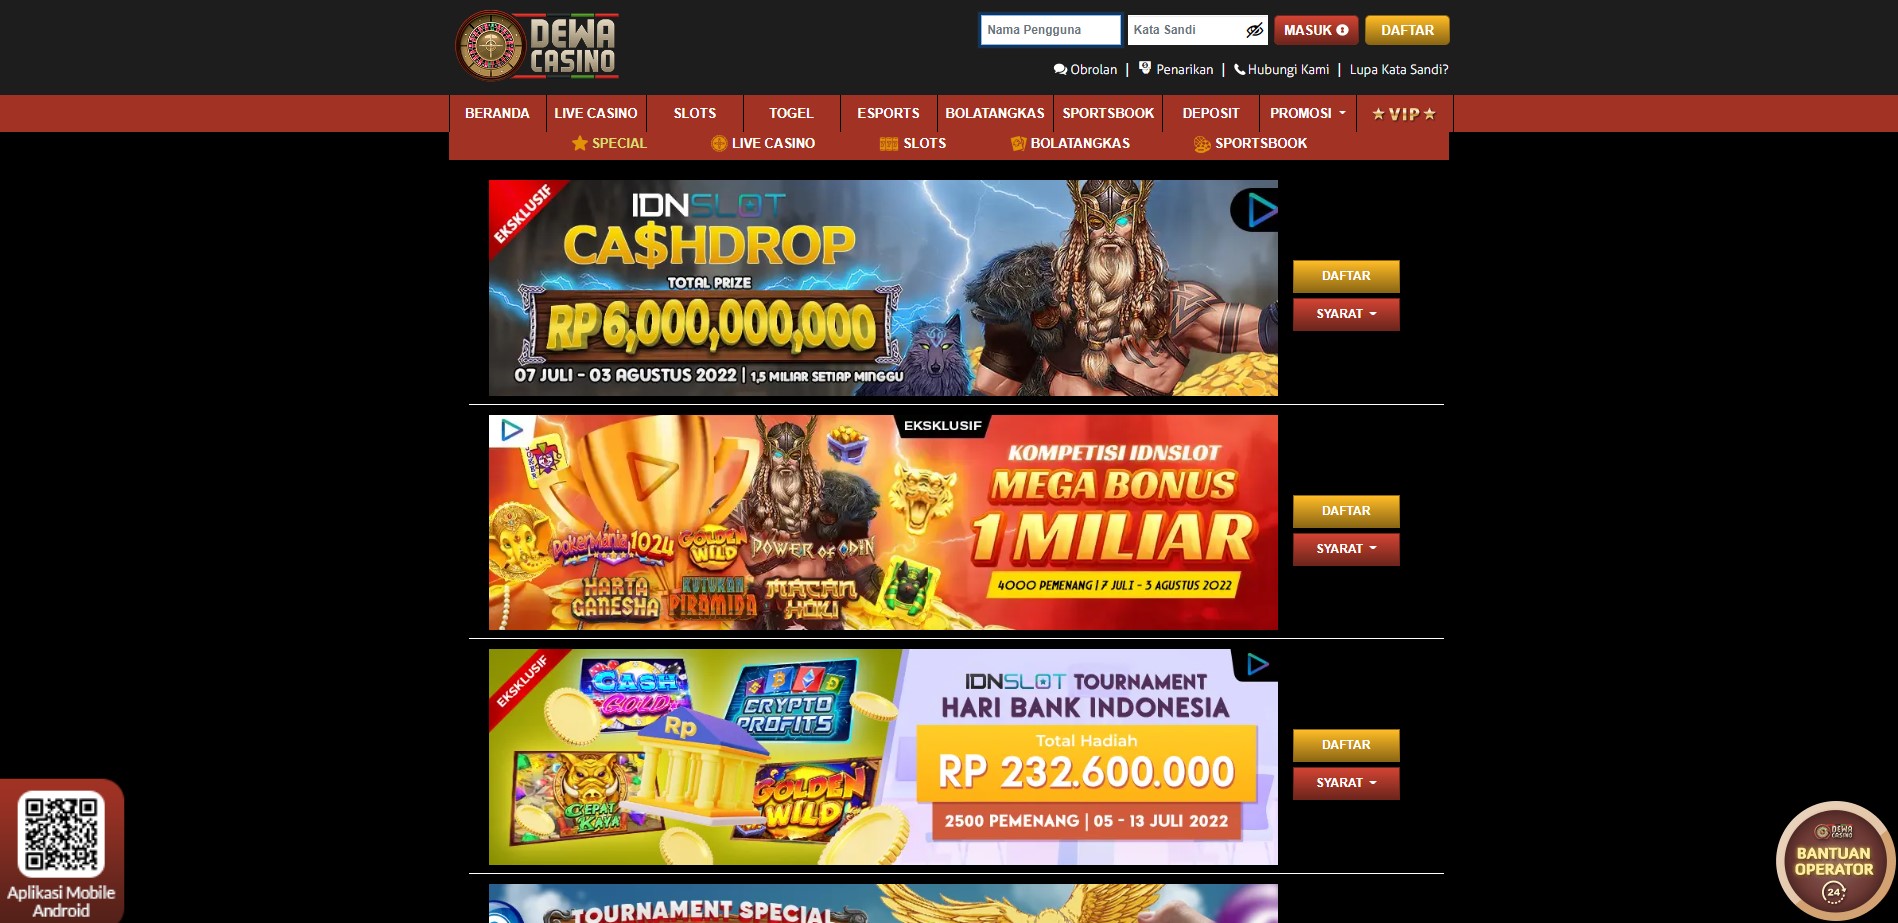 promotion offers at dewa casino